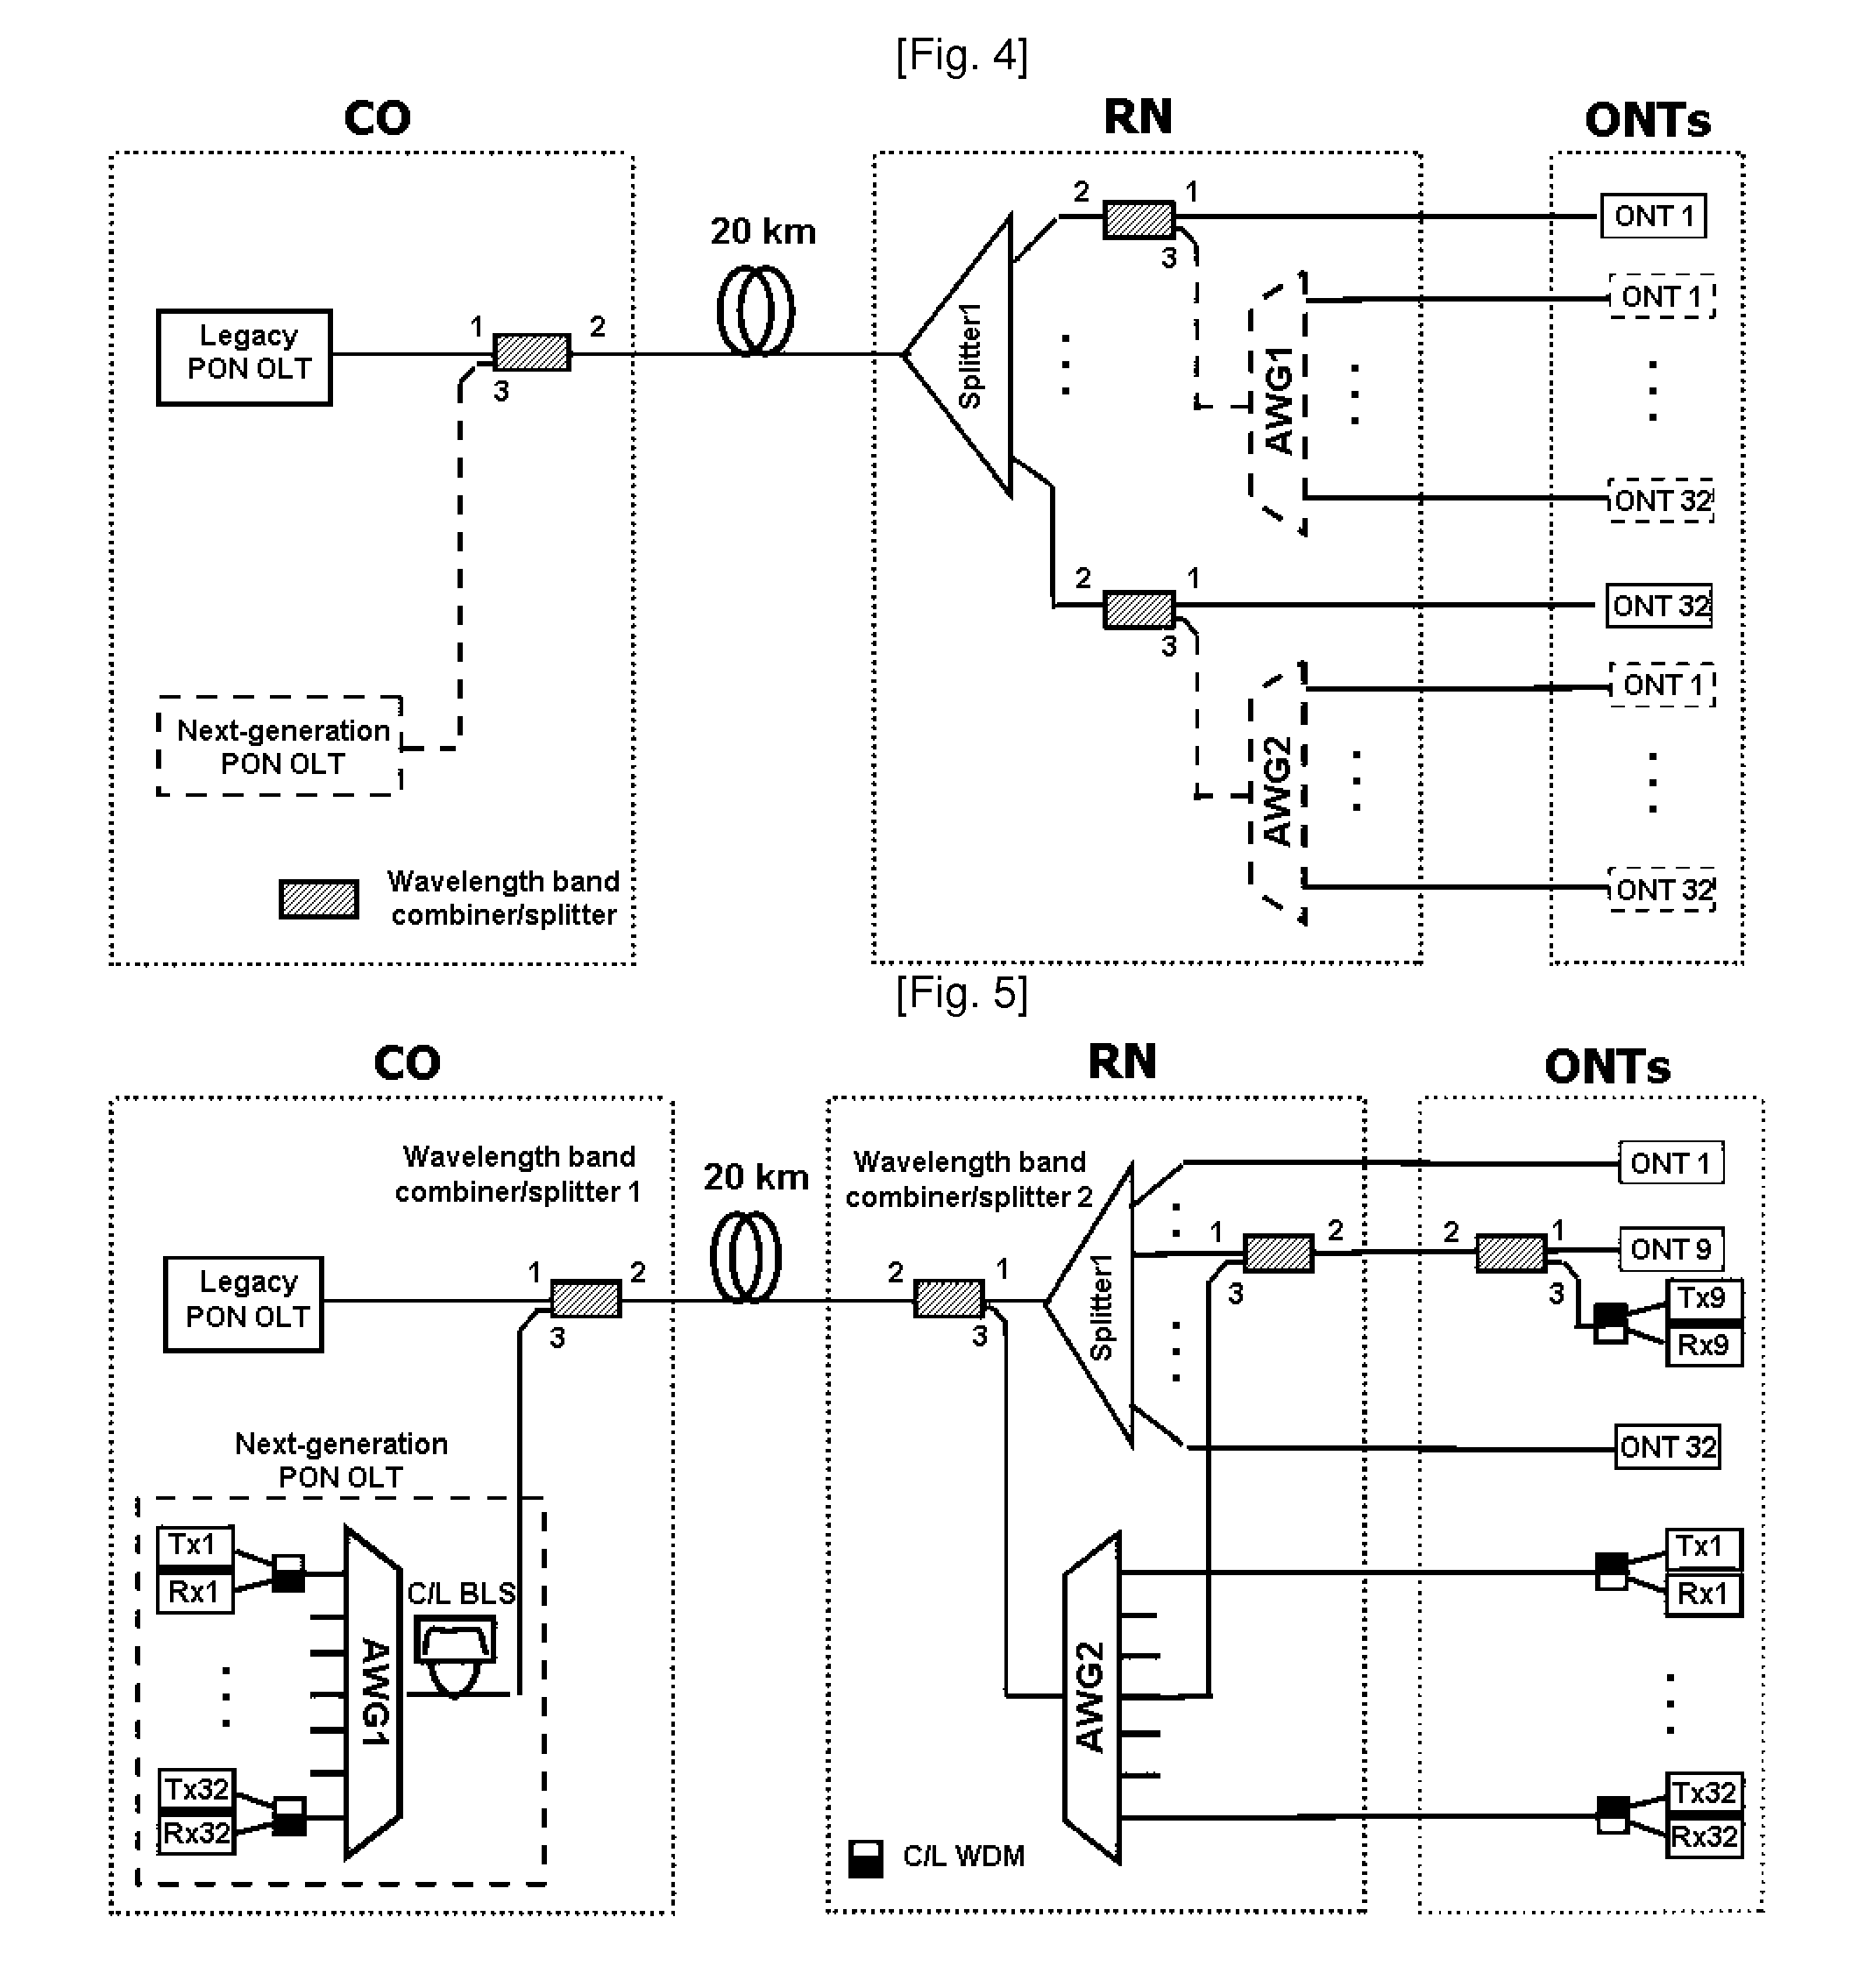 Method and network architecture for upgrading legacy passive optical network to wavelength division multiplexing passive optical network based next-generation passive optical network